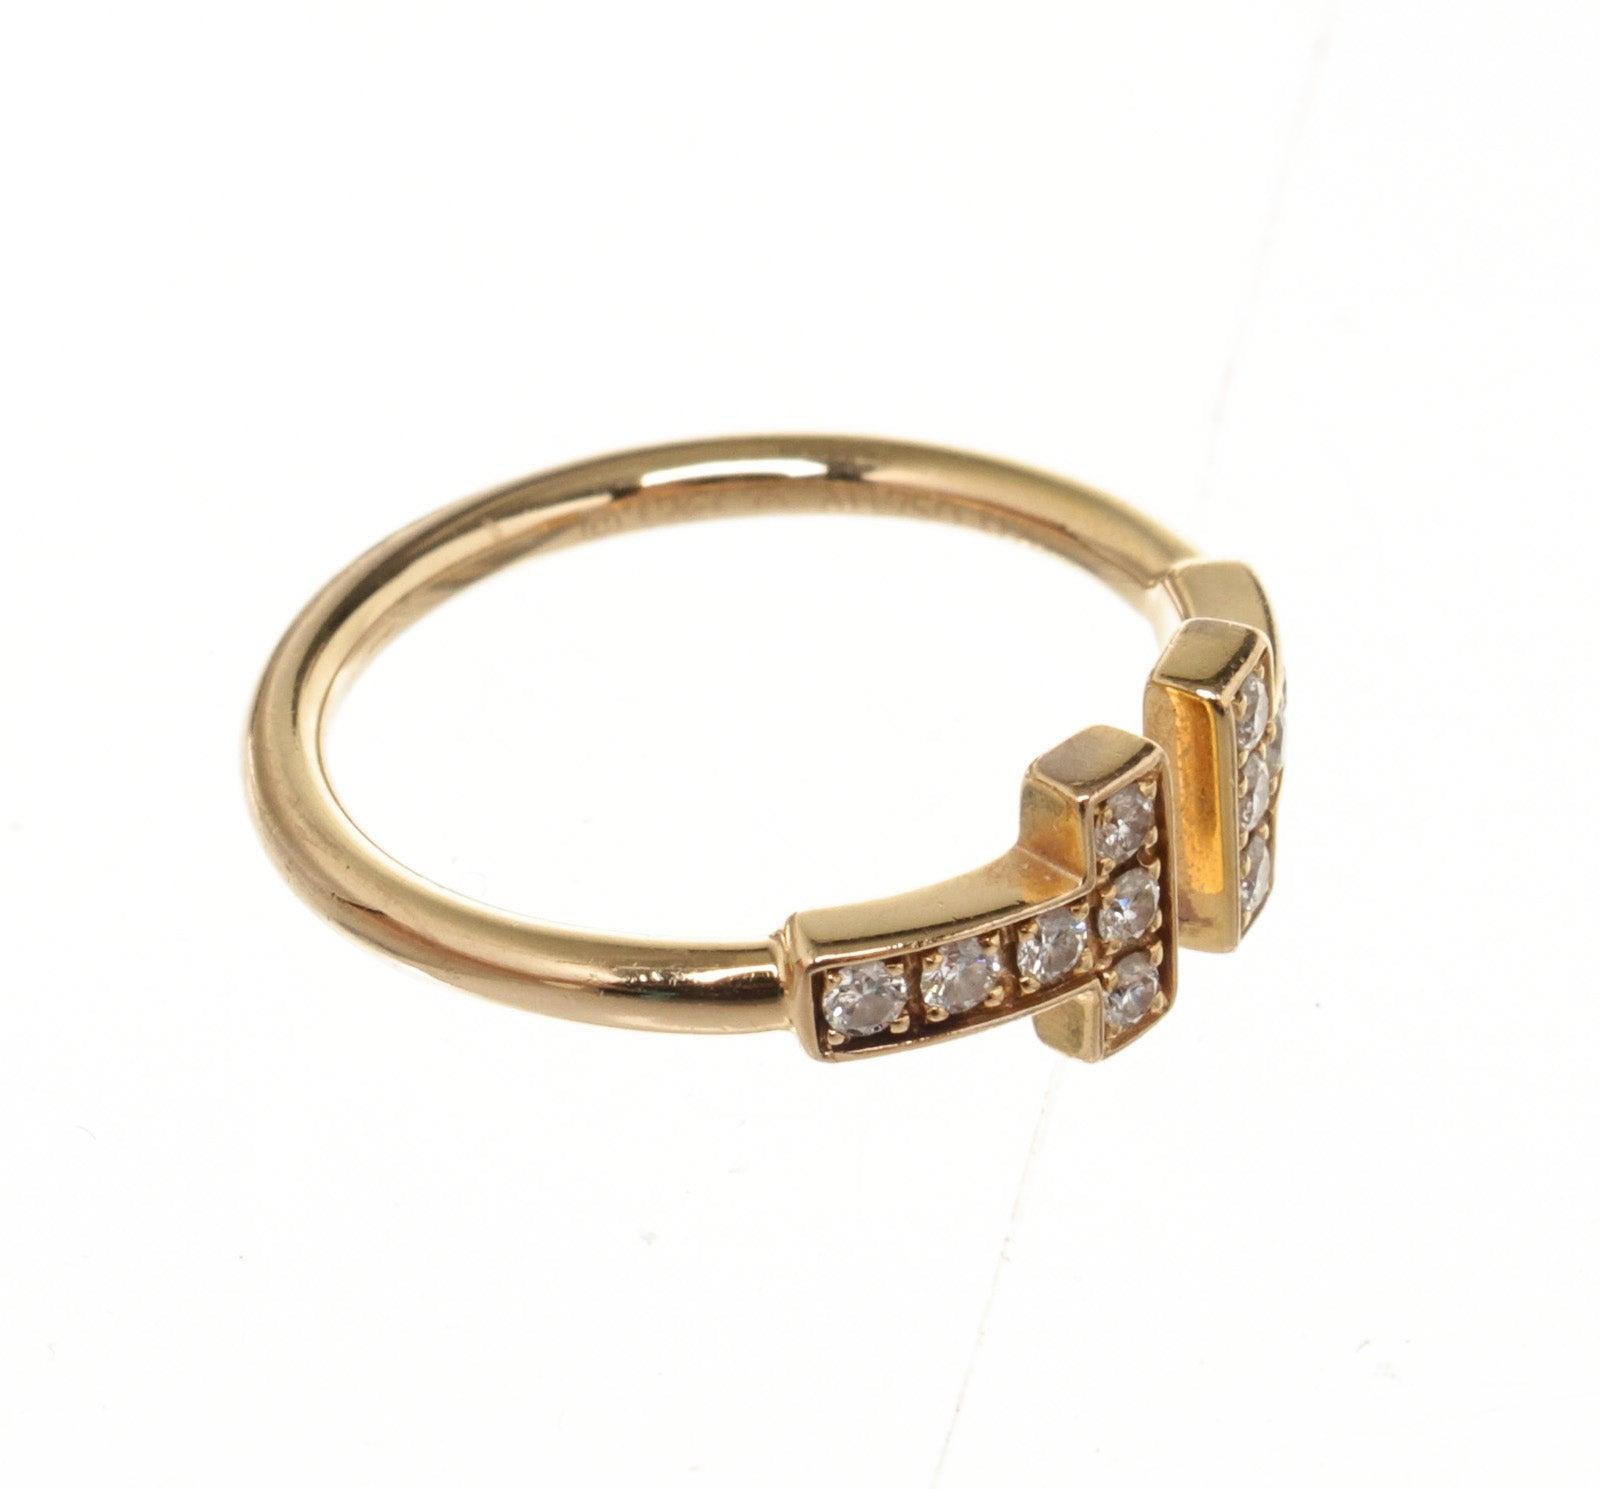 Tiffany & Co Gold T Wire Diamond Ring with gold-tone hardware. Size 4.5


47111MSC